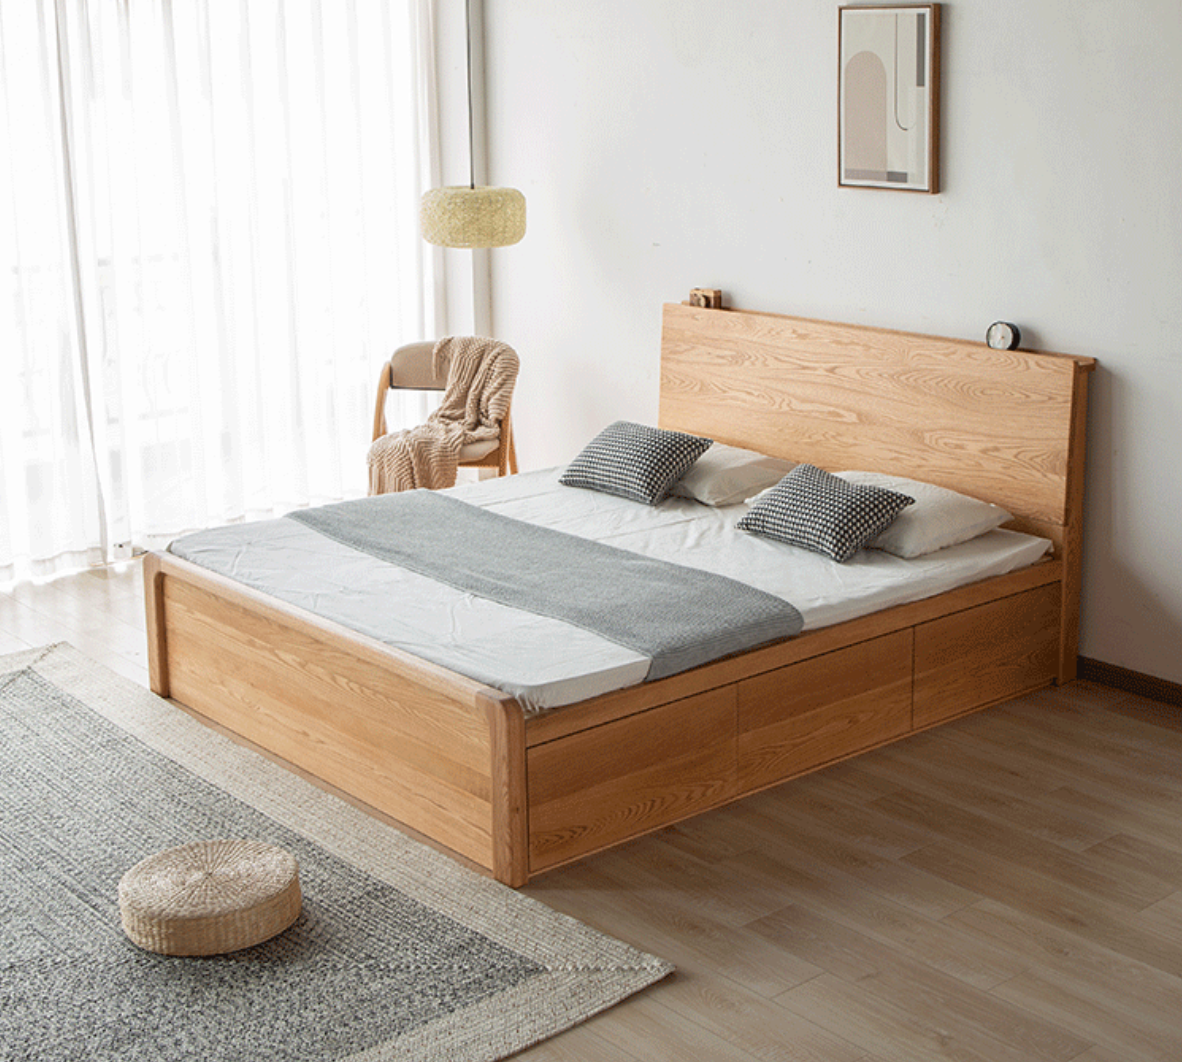 oak wood bed with drawer, hydraulic bed with storage compartments